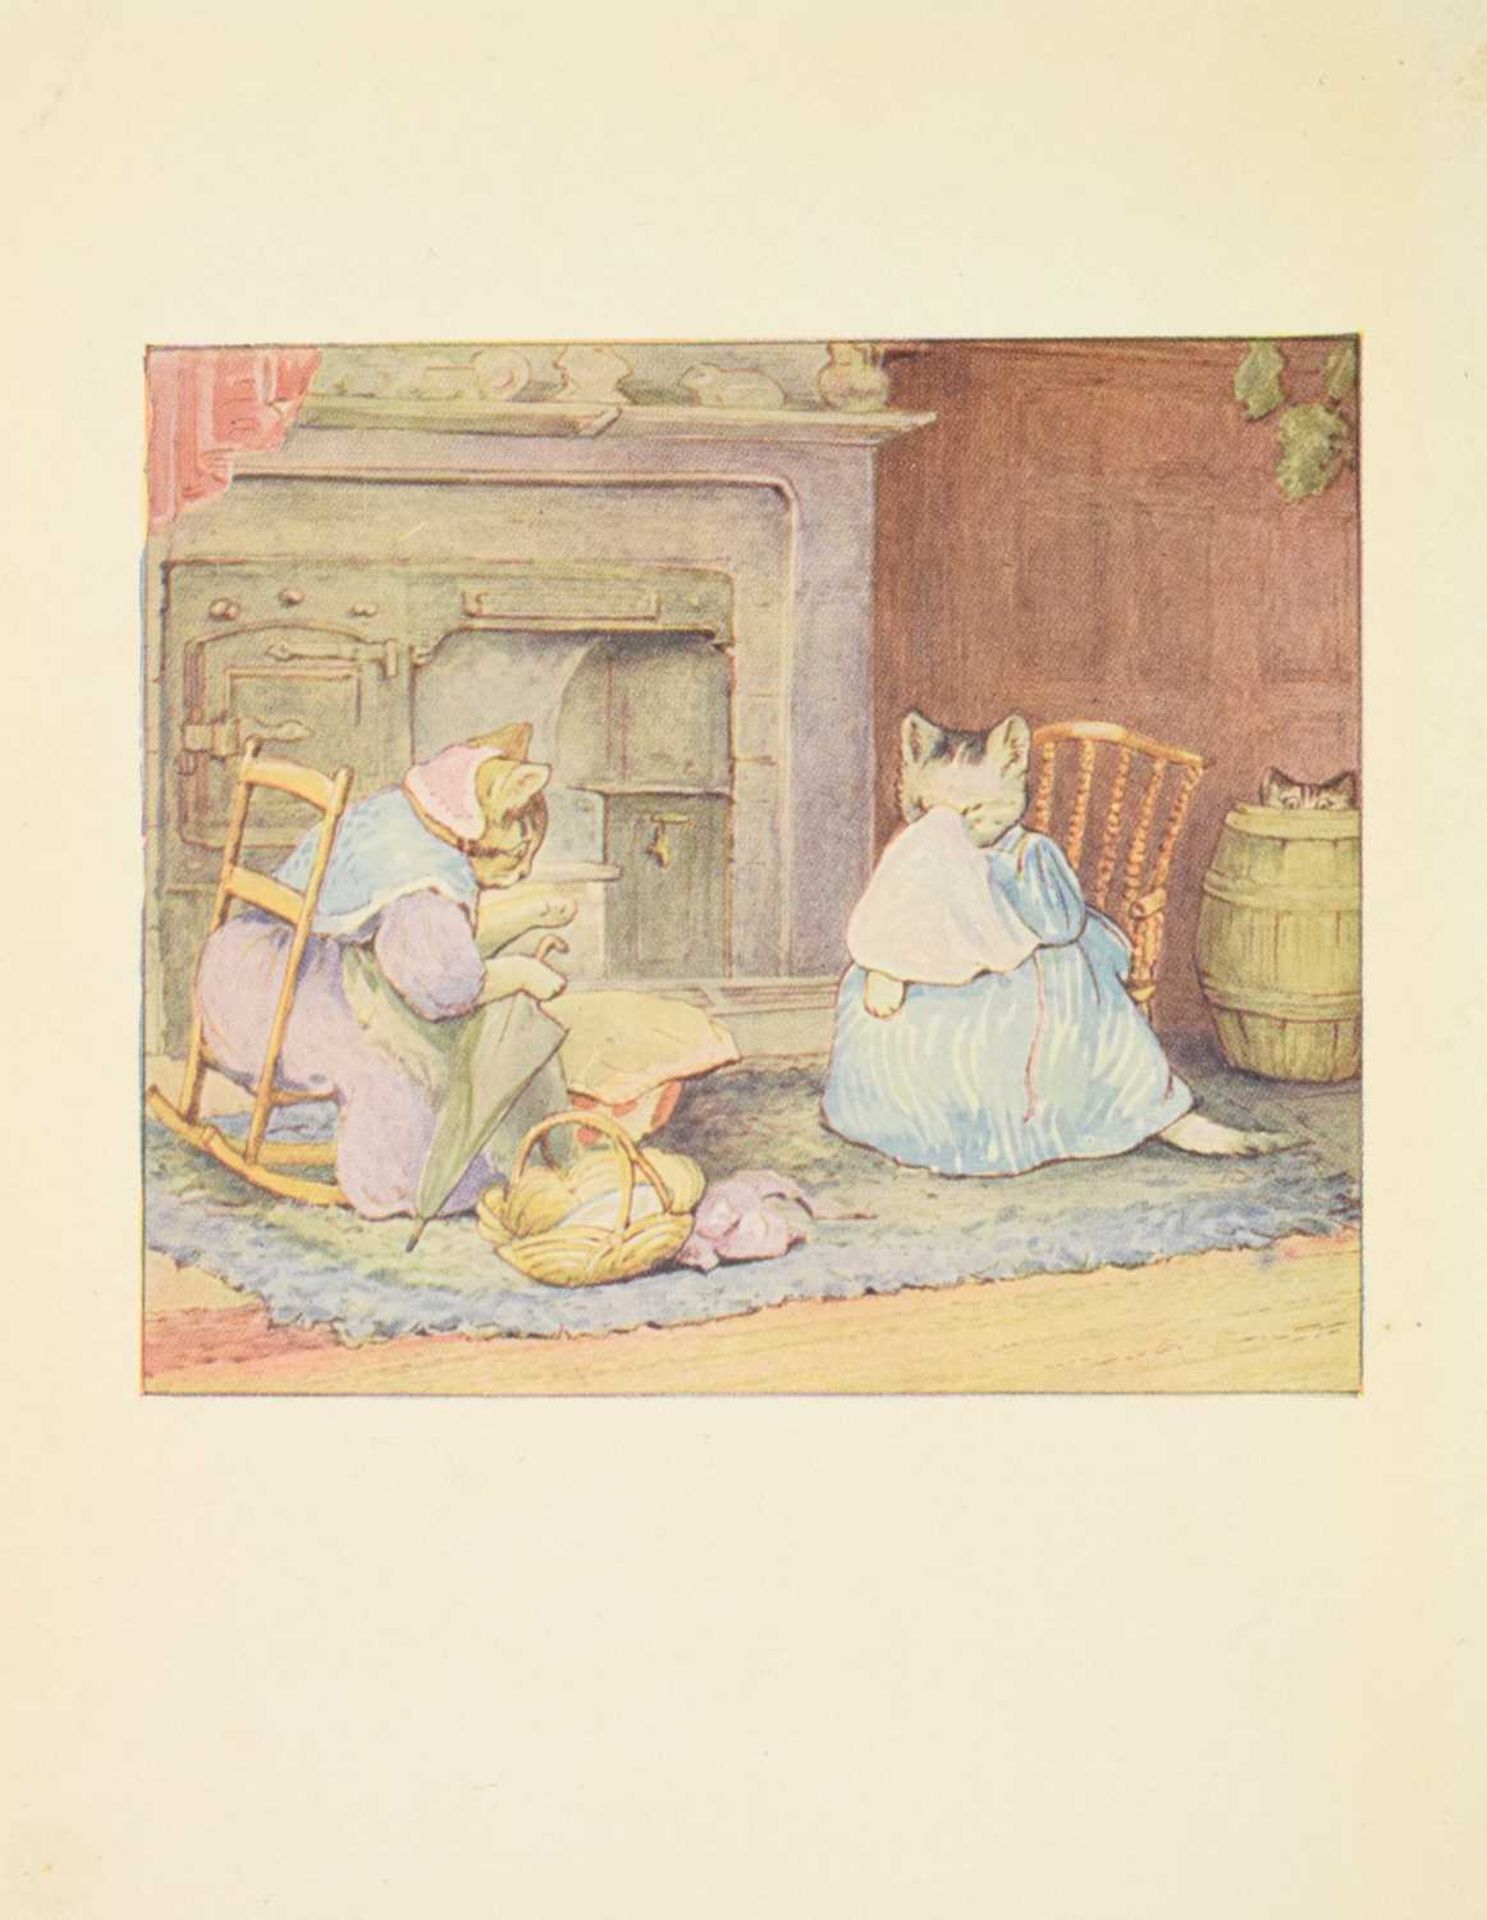 Potter, Beatrix - 'The Tale of Samuel Whiskers' - First thus [1926] - Image 15 of 15